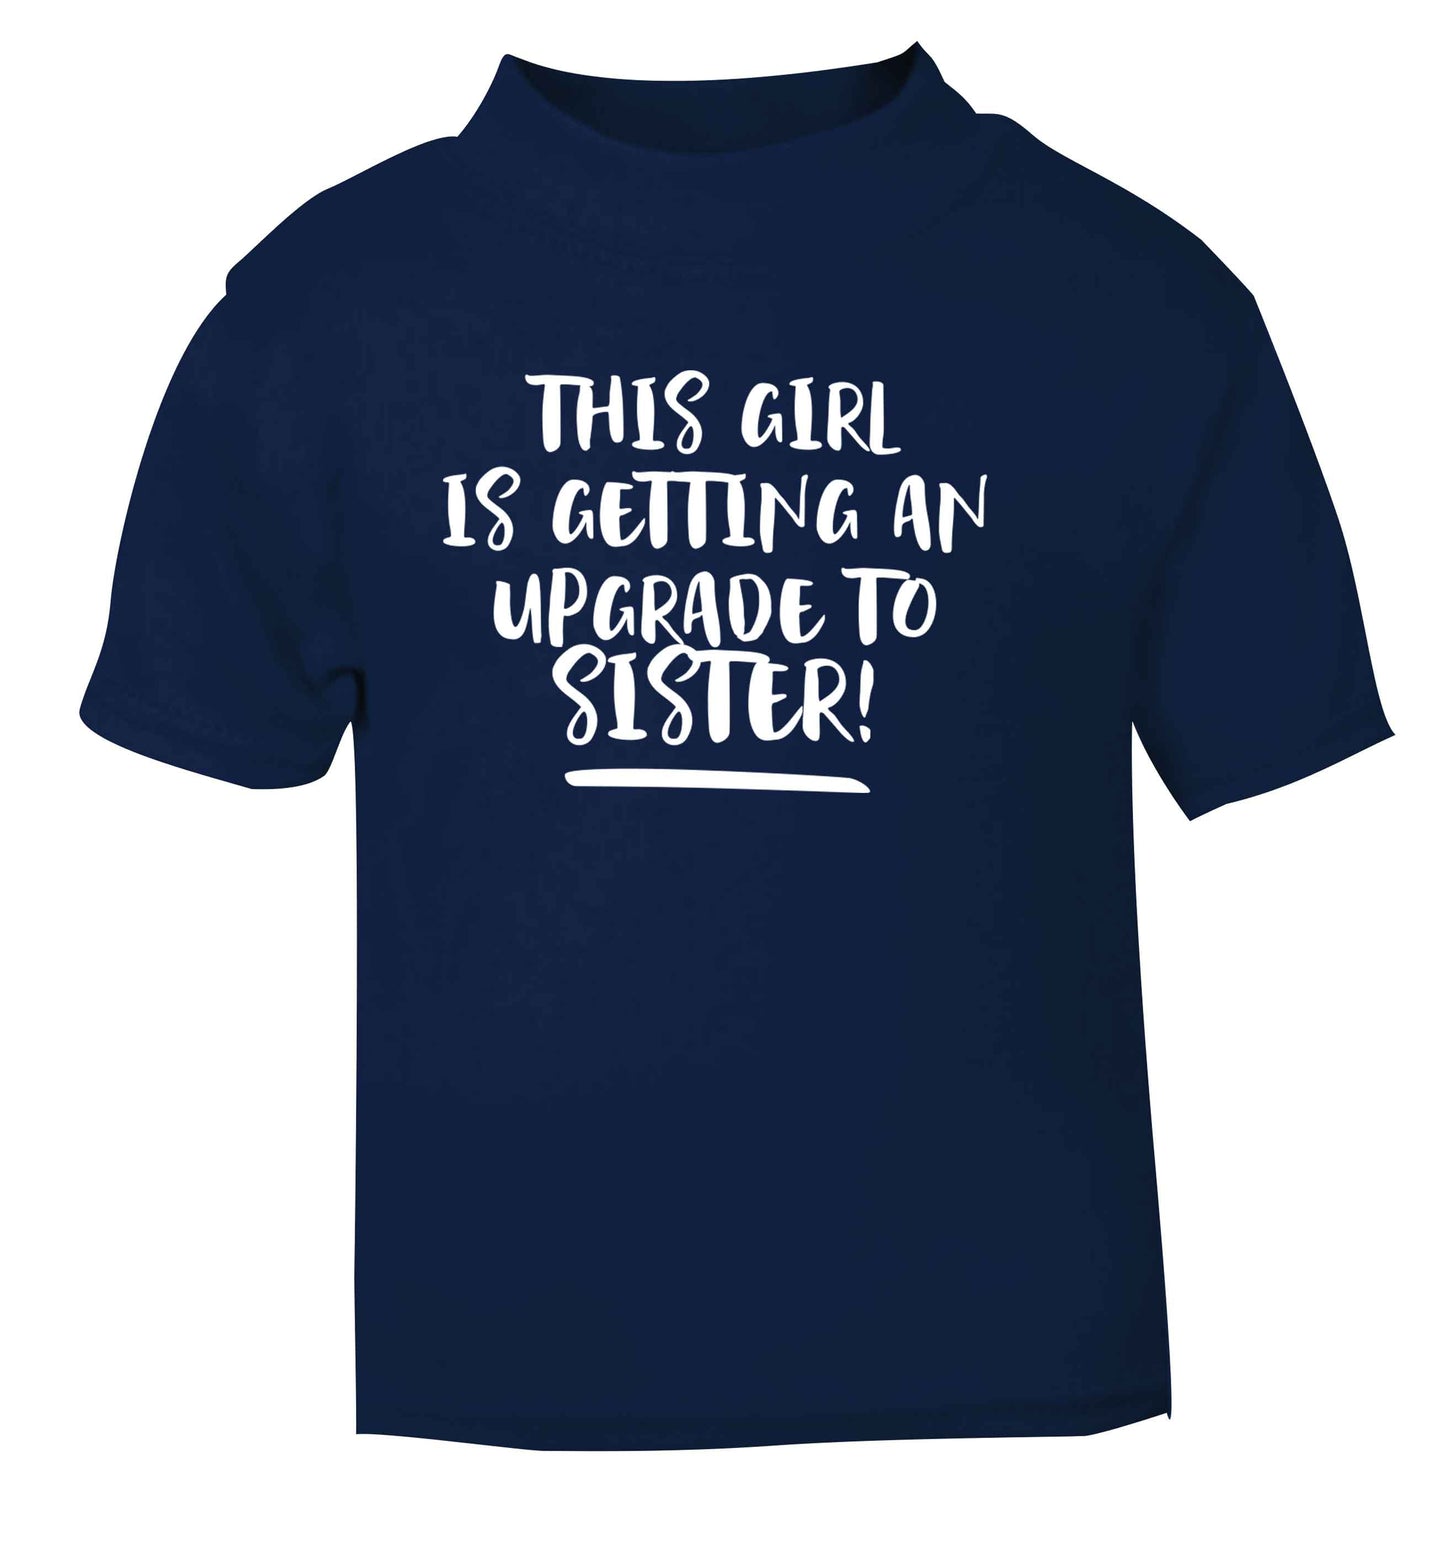 This girl is getting an upgrade to sister! navy Baby Toddler Tshirt 2 Years